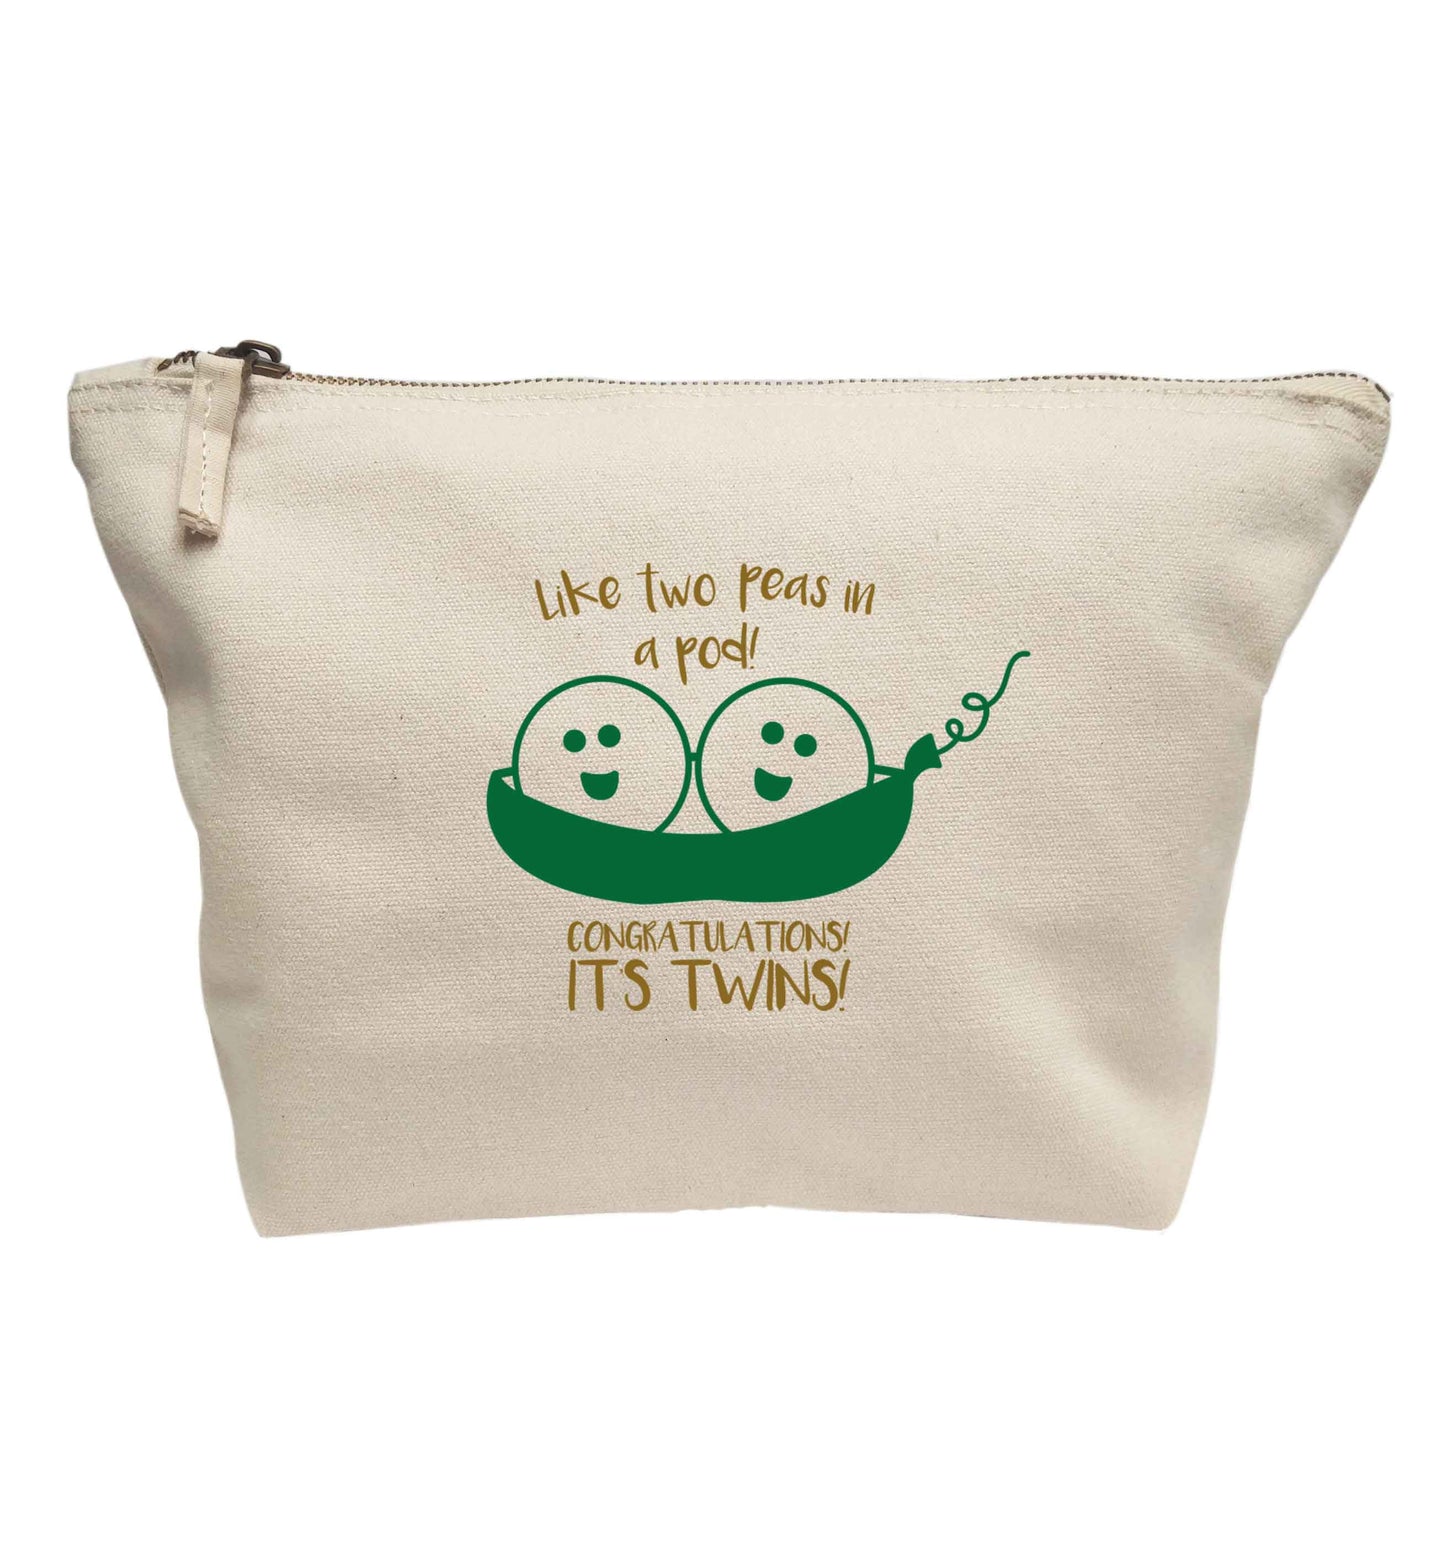 Like two peas in a pod! Congratulations it's twins! | Makeup / wash bag